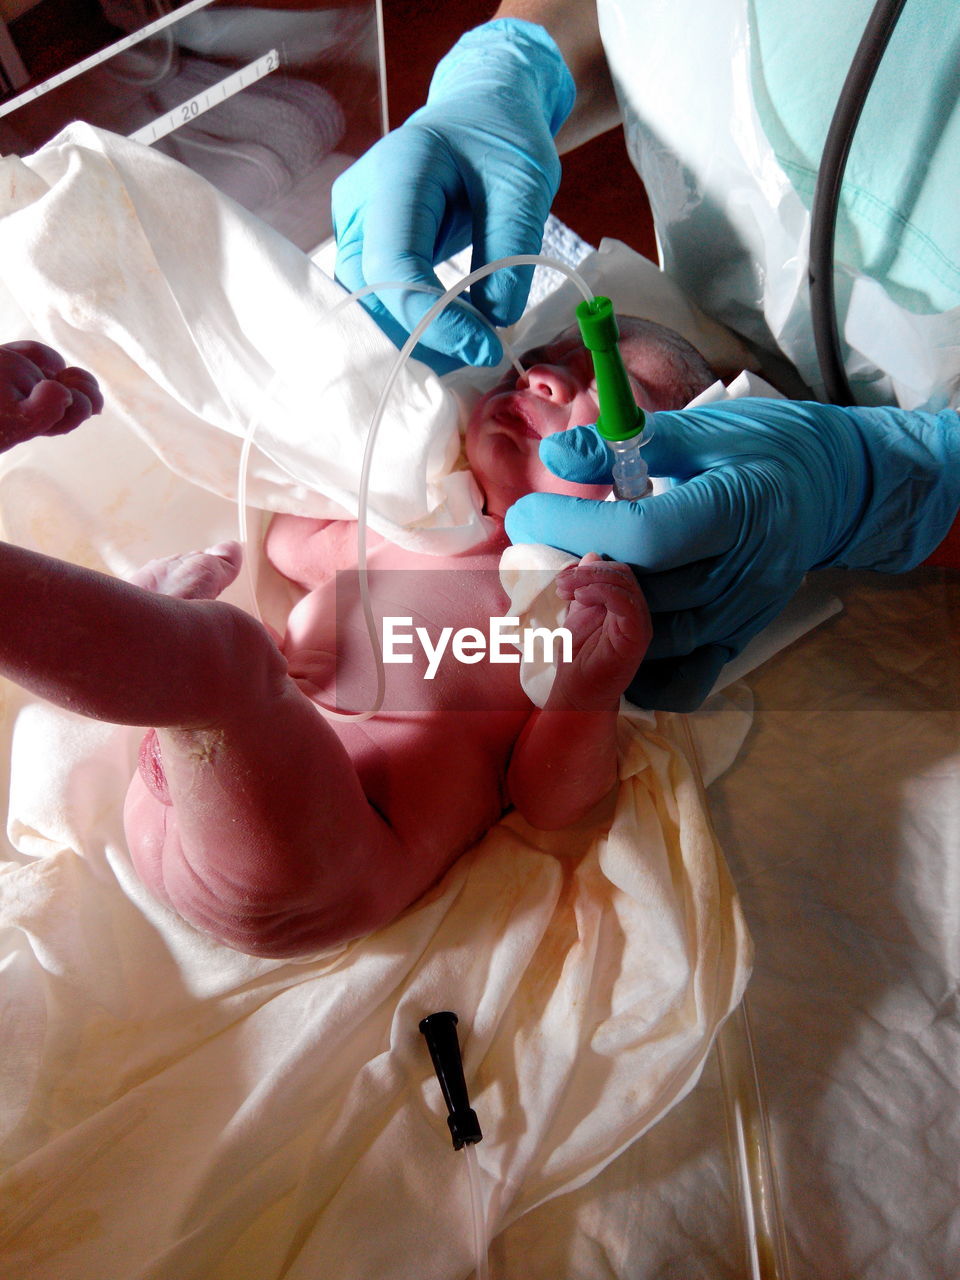 Midsection of doctor inserting nasogastric tube in newborn nose at hospital